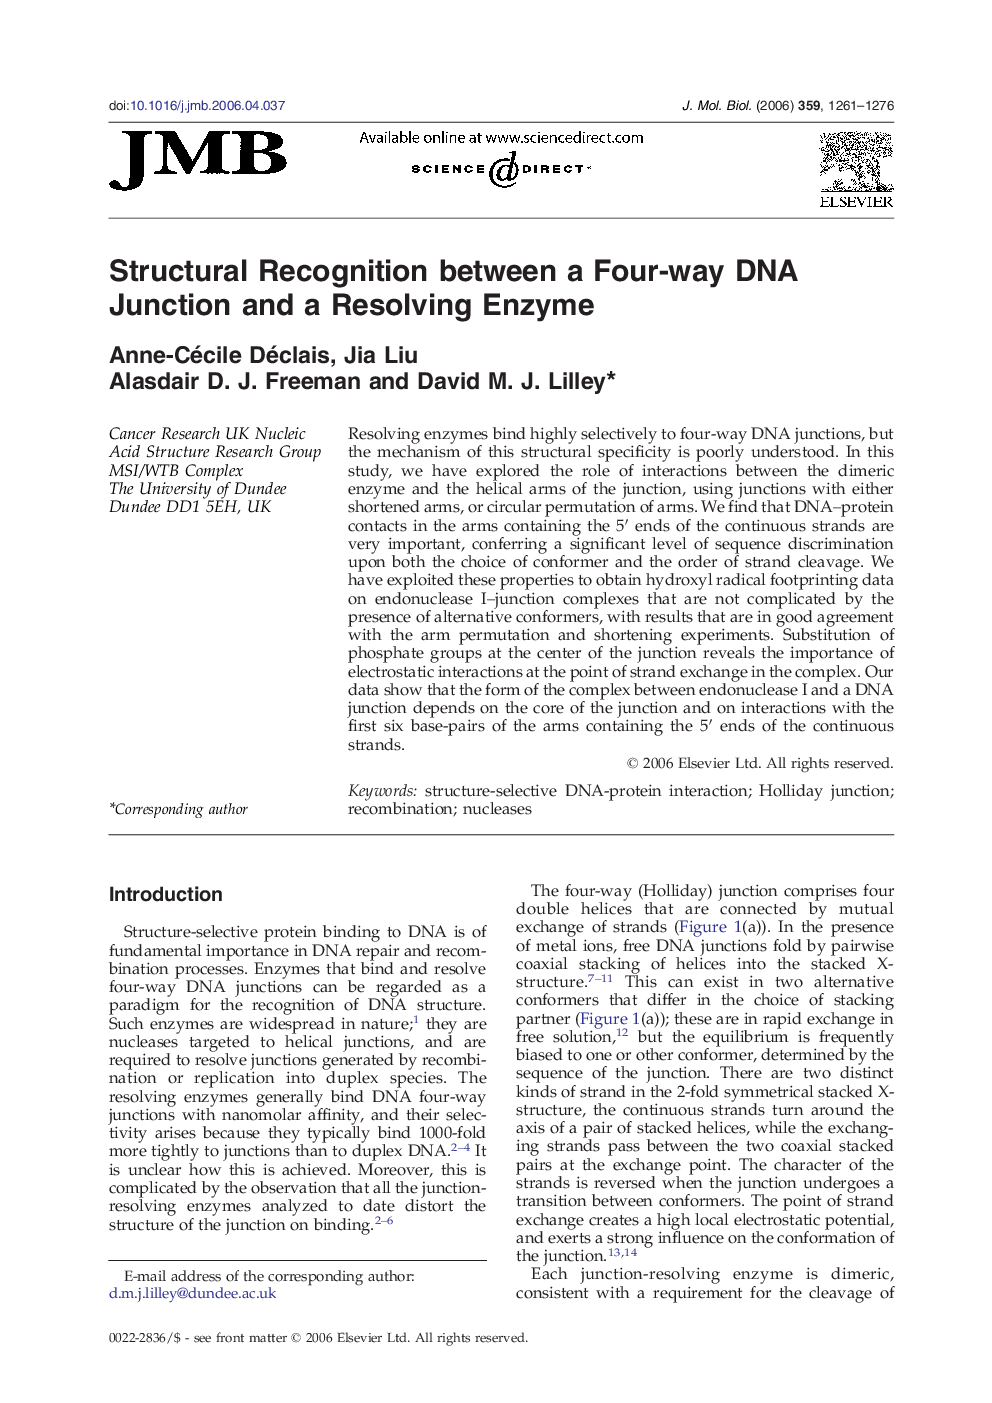 Structural Recognition between a Four-way DNA Junction and a Resolving Enzyme